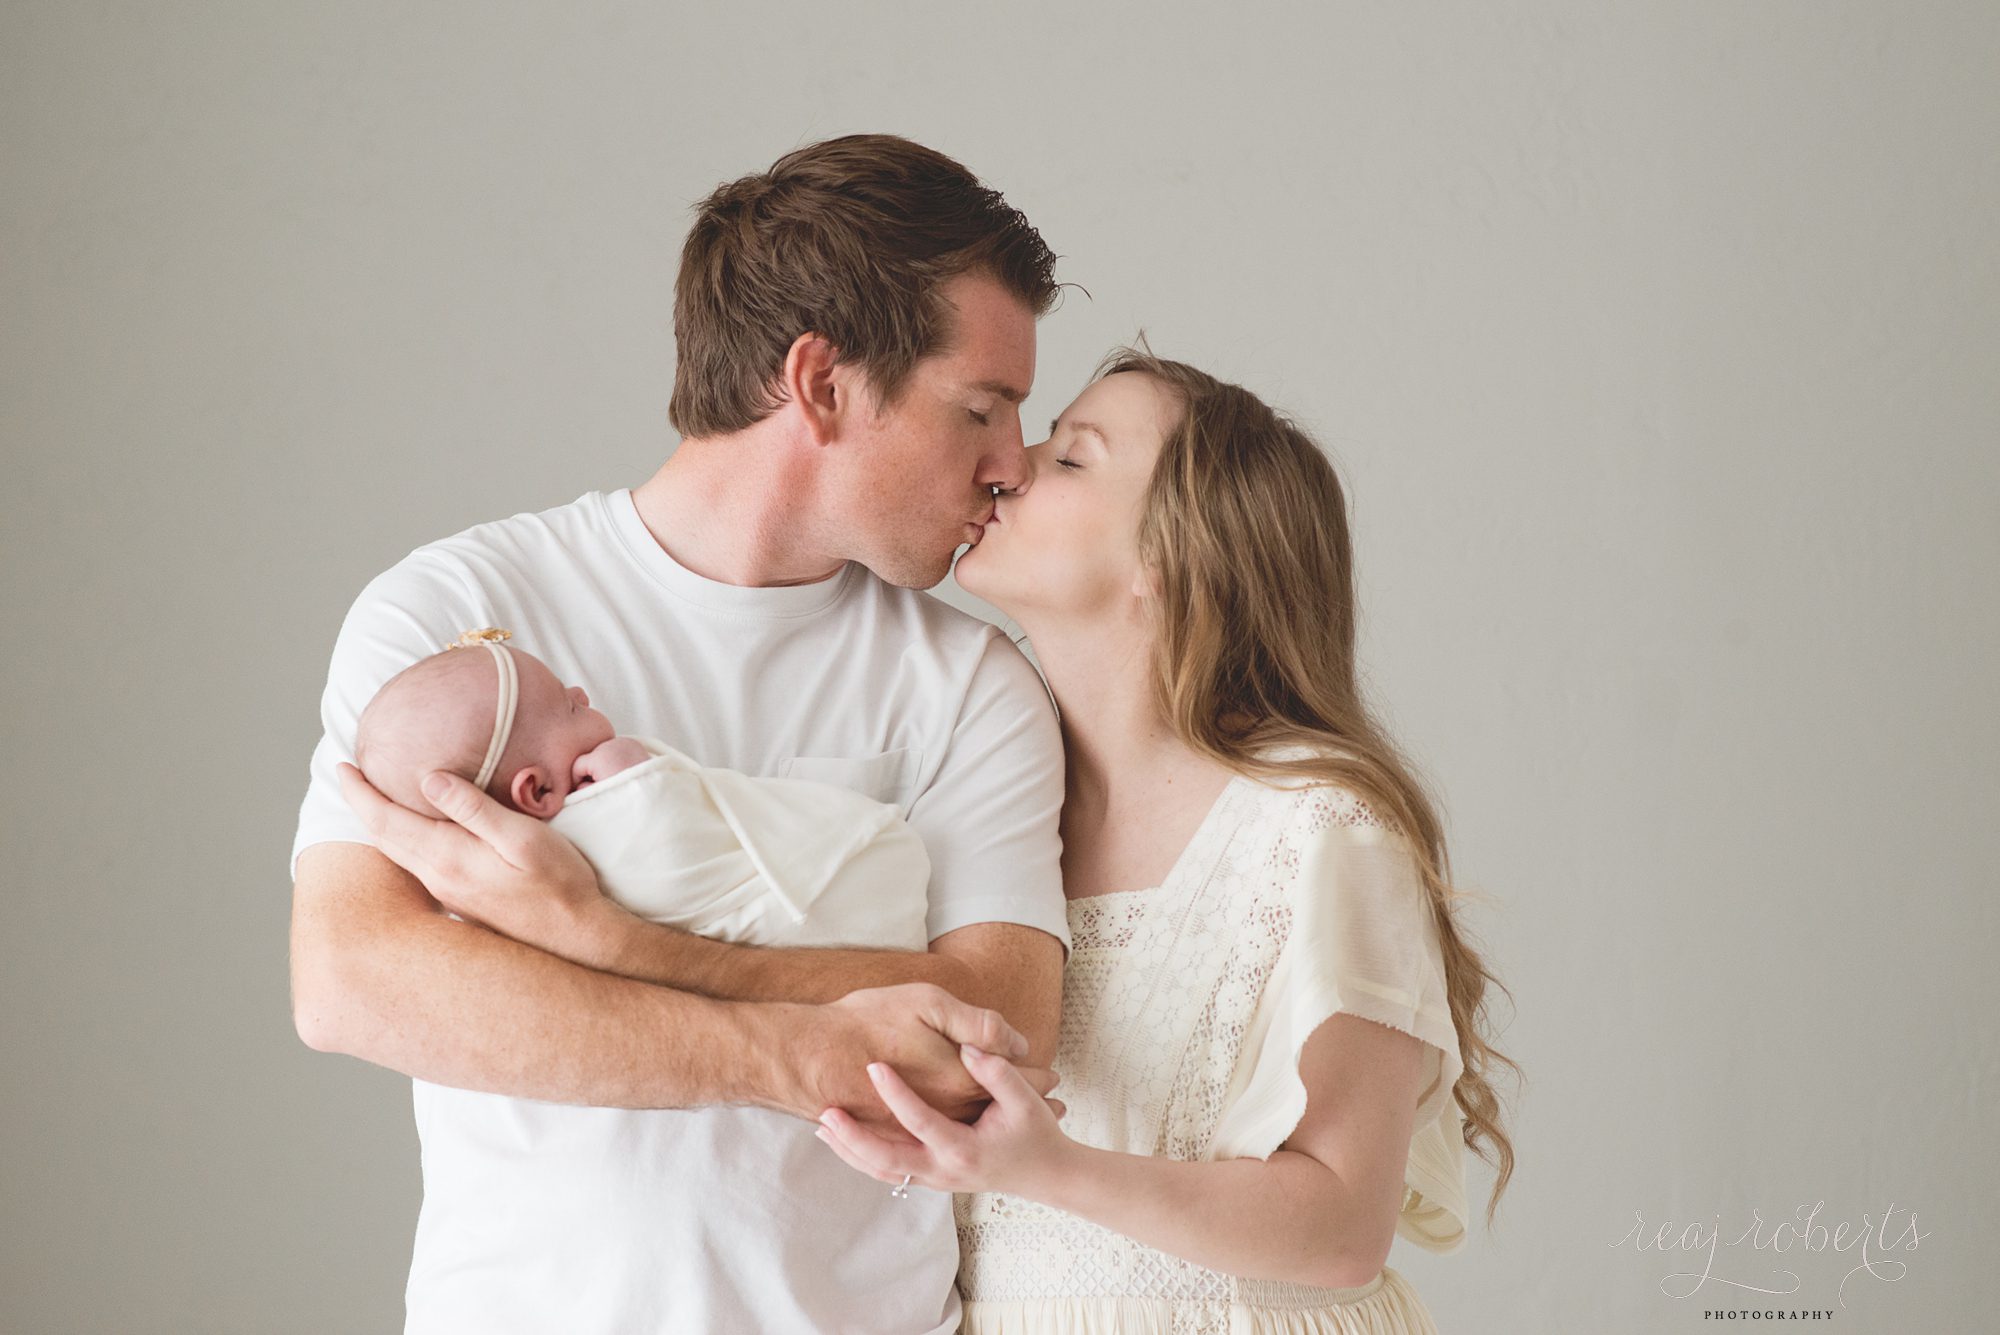 Family posing with newborn baby | Reaj Roberts Photography